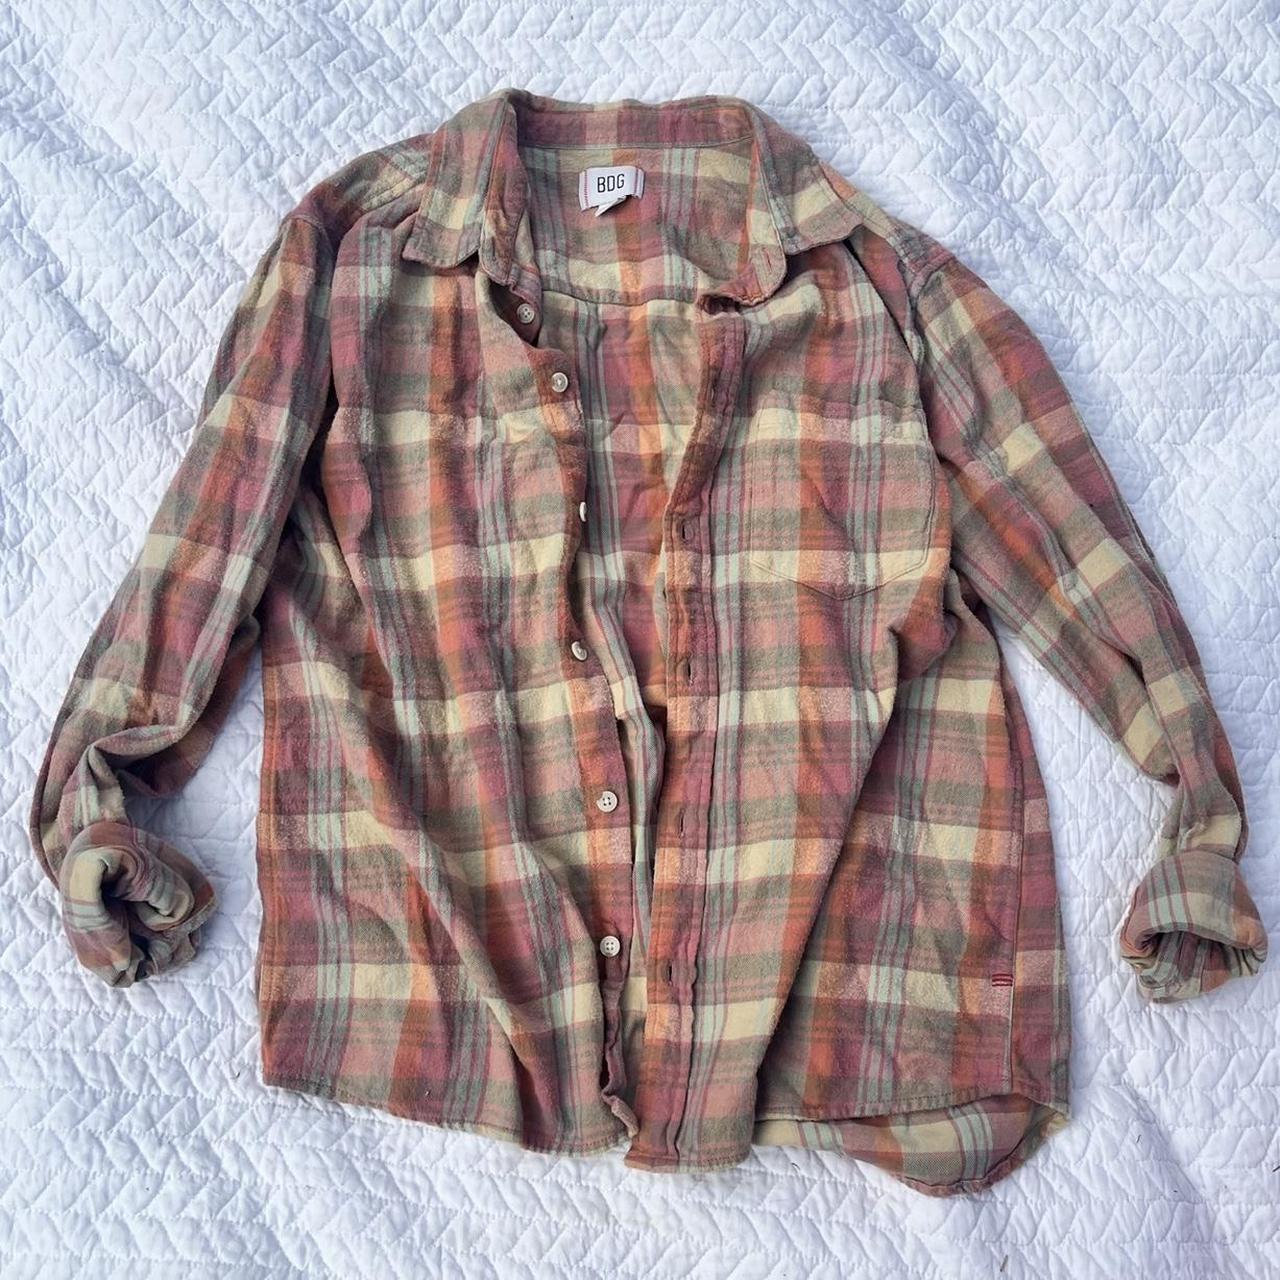 Urban outfitters BDG flannel - Depop